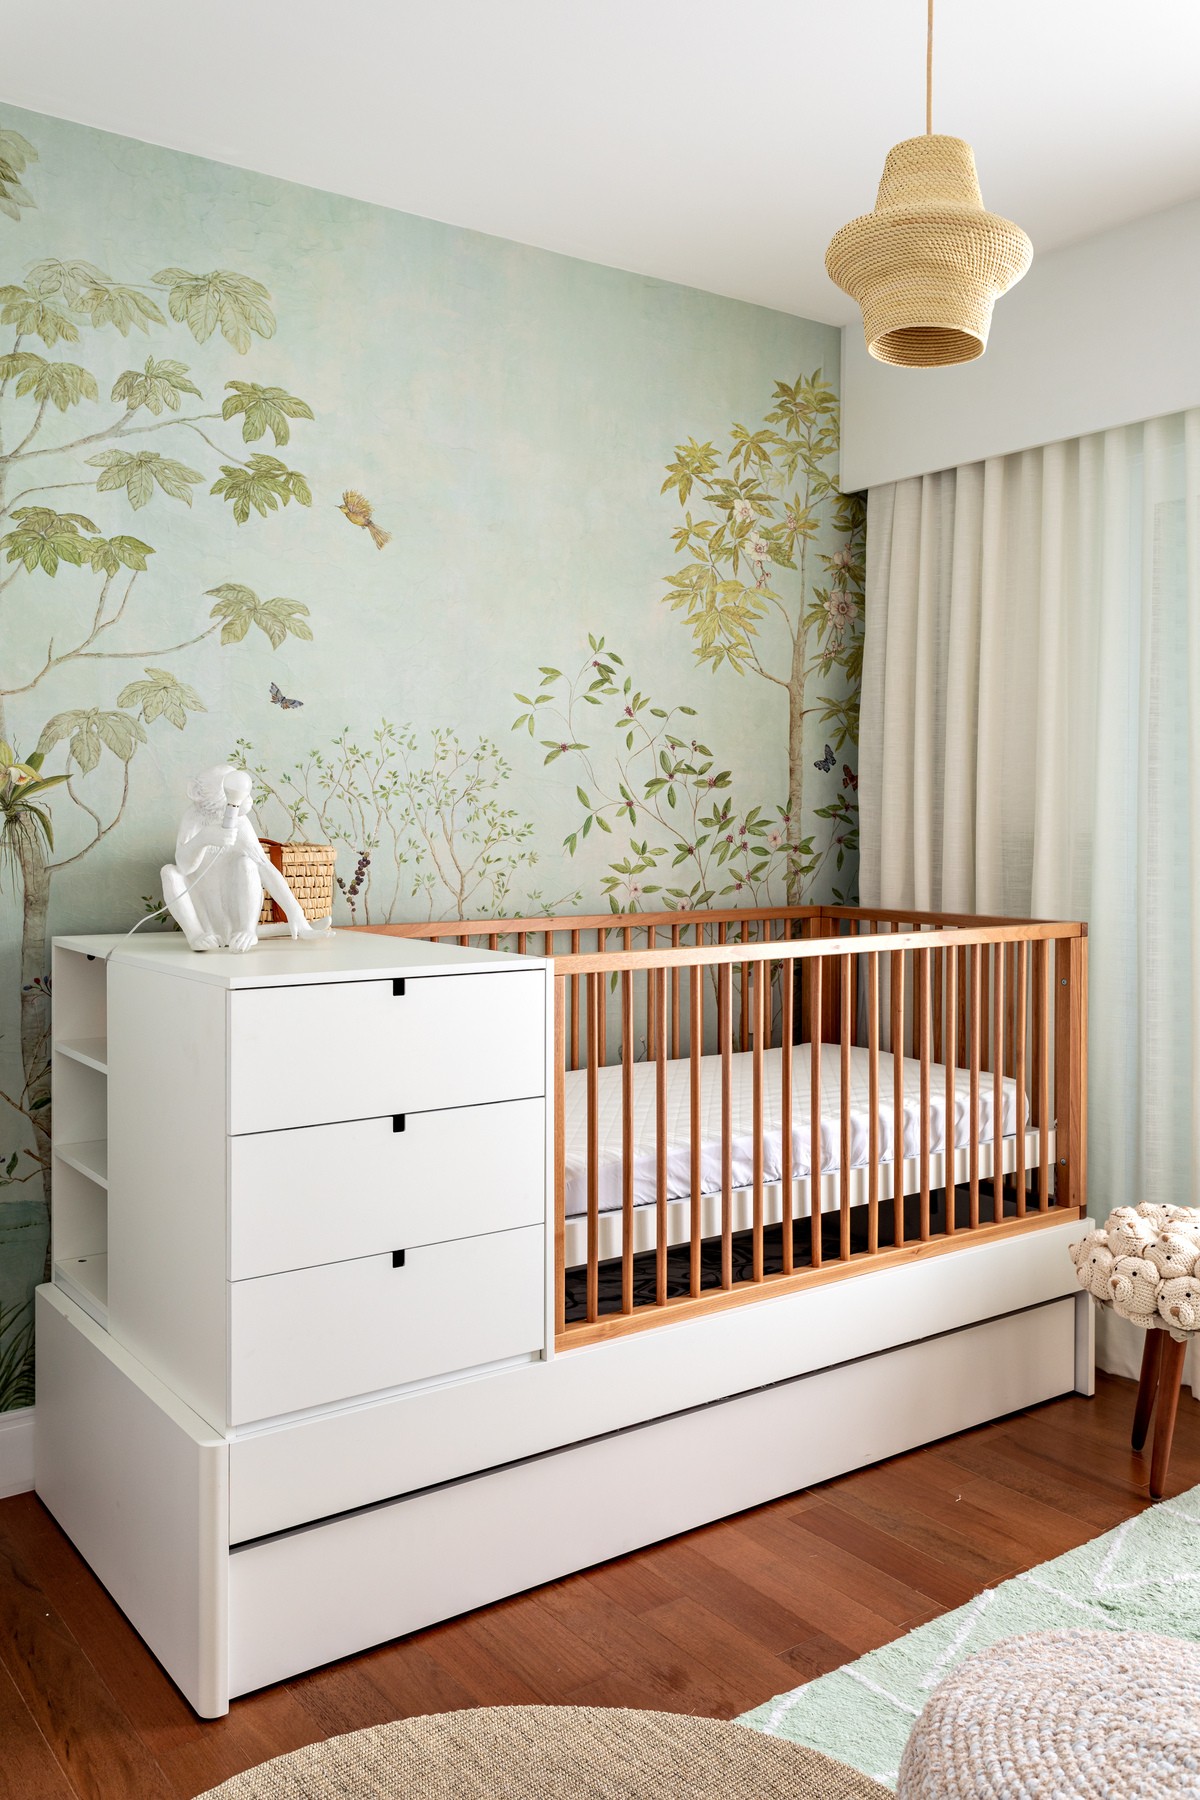 BABY'S ROOM |  The wallpaper is by White.  The crib, made in white and wood, follows the palette of the rest of the apartment (Photo: Fran Parente / Disclosure)